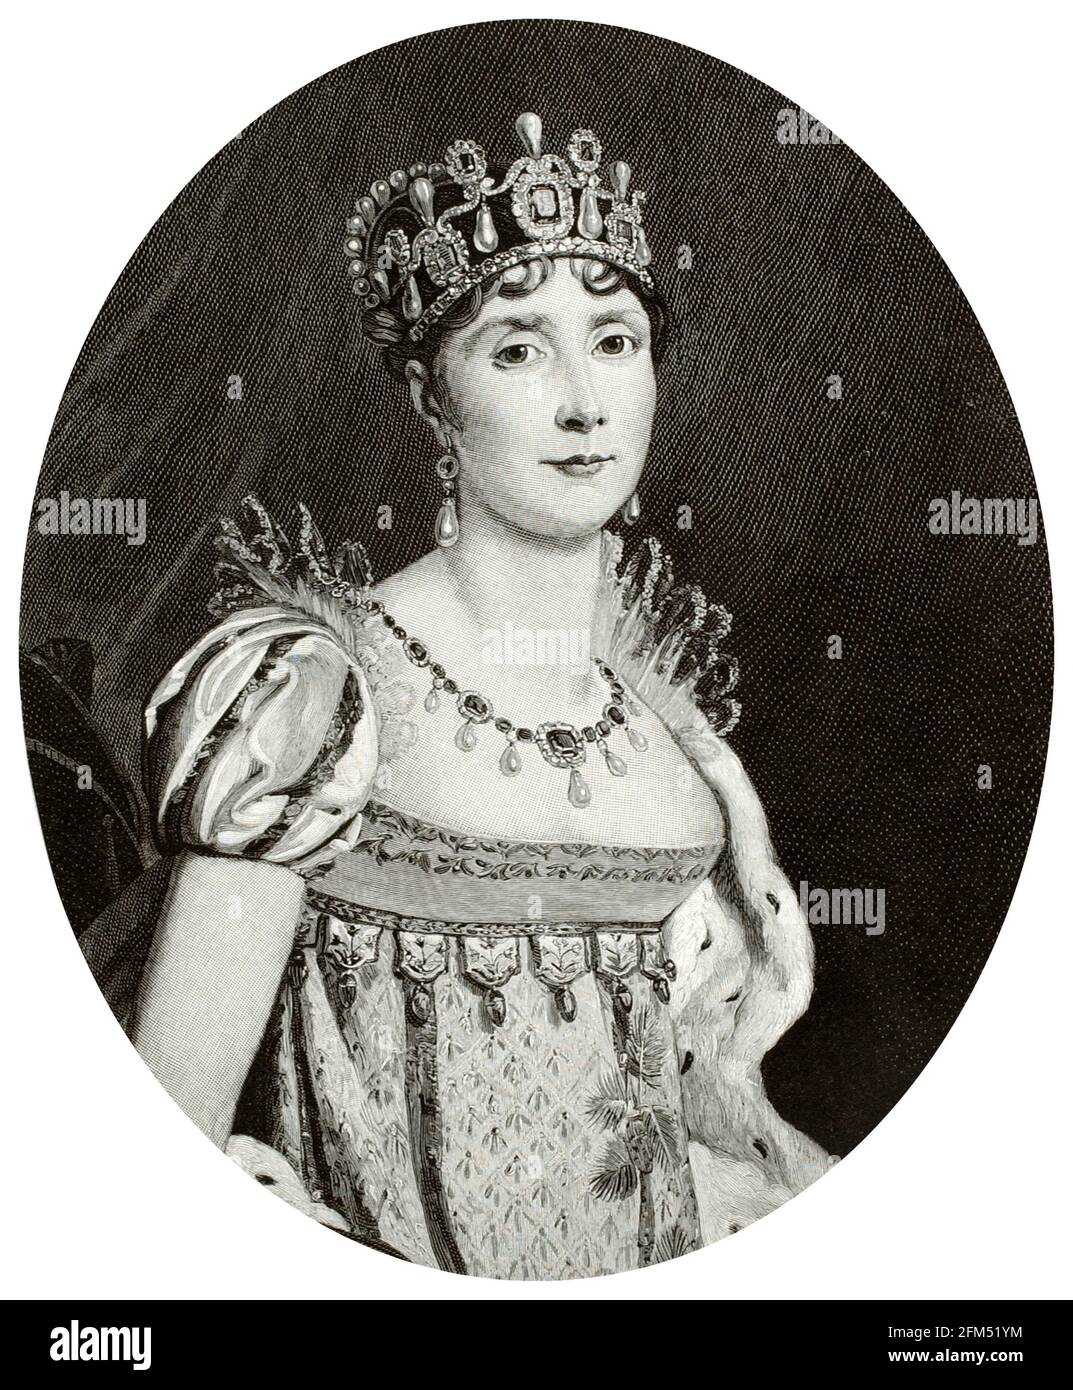 Joséphine Bonaparte (1763-1814), Empress Consort of France (1804-18100), wife of Emperor Napoleon I of France, portrait engraving by Henry Wolf, 1895 Stock Photo